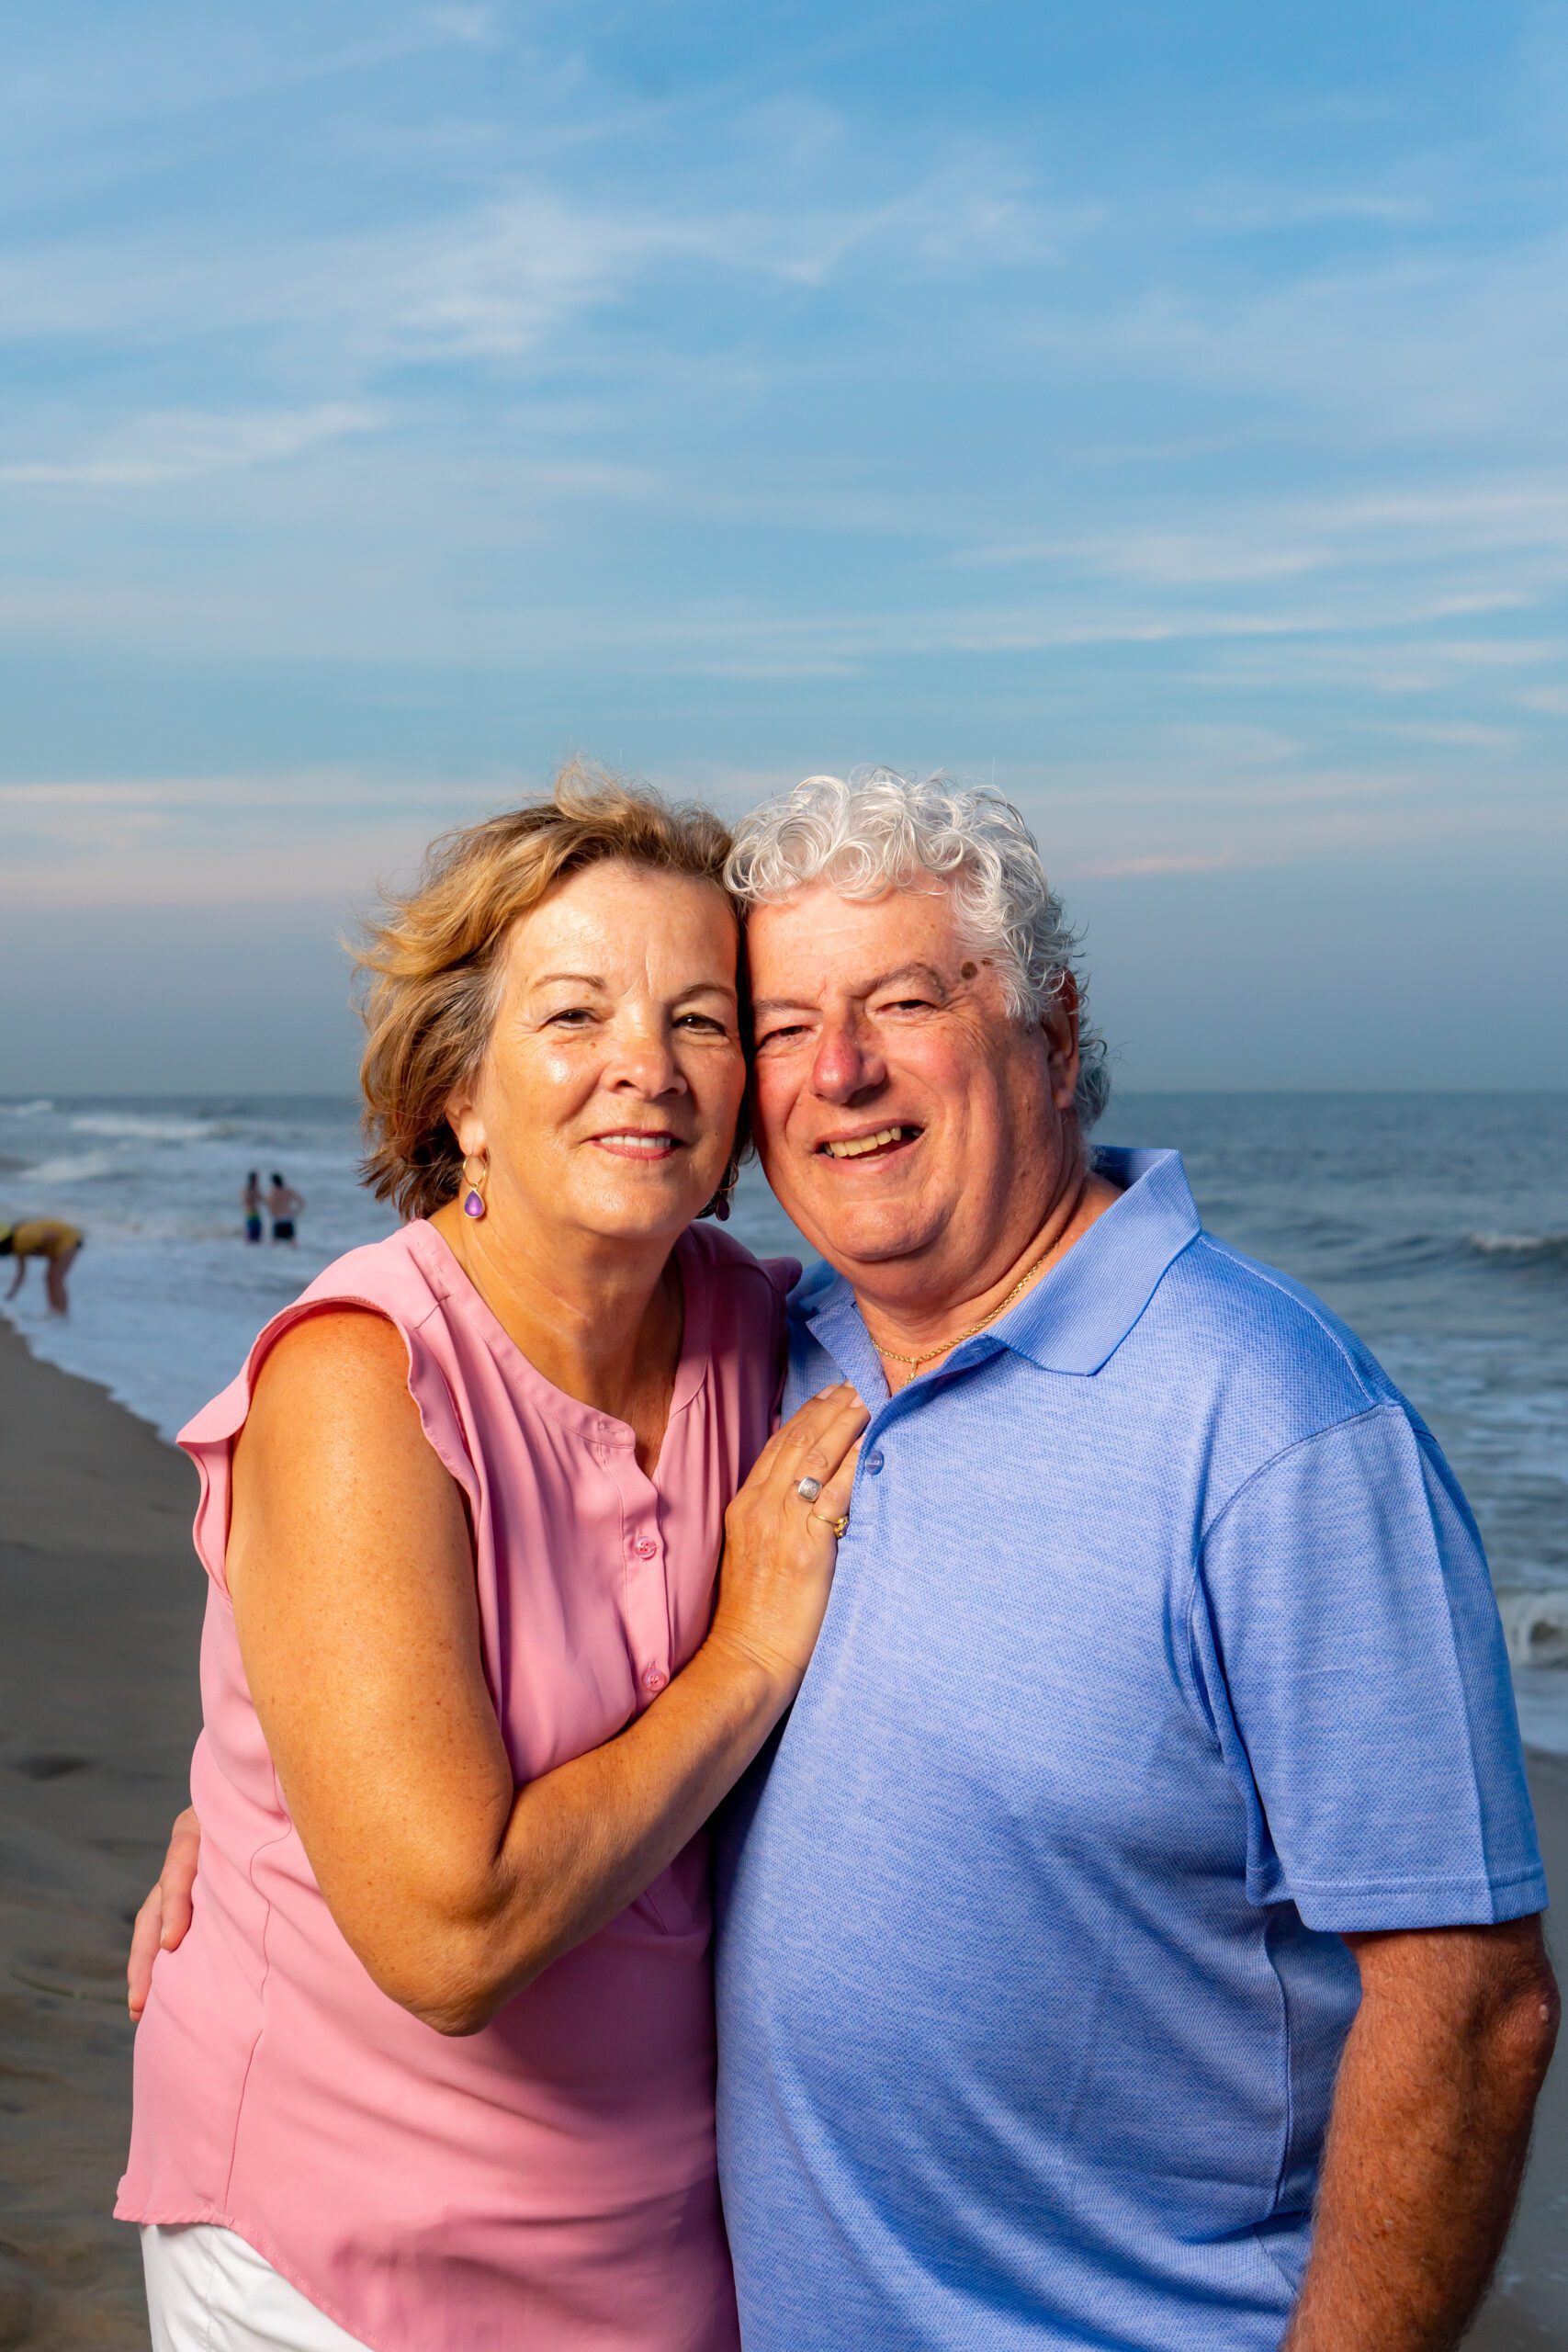 a man and woman standing next to each other on a beach